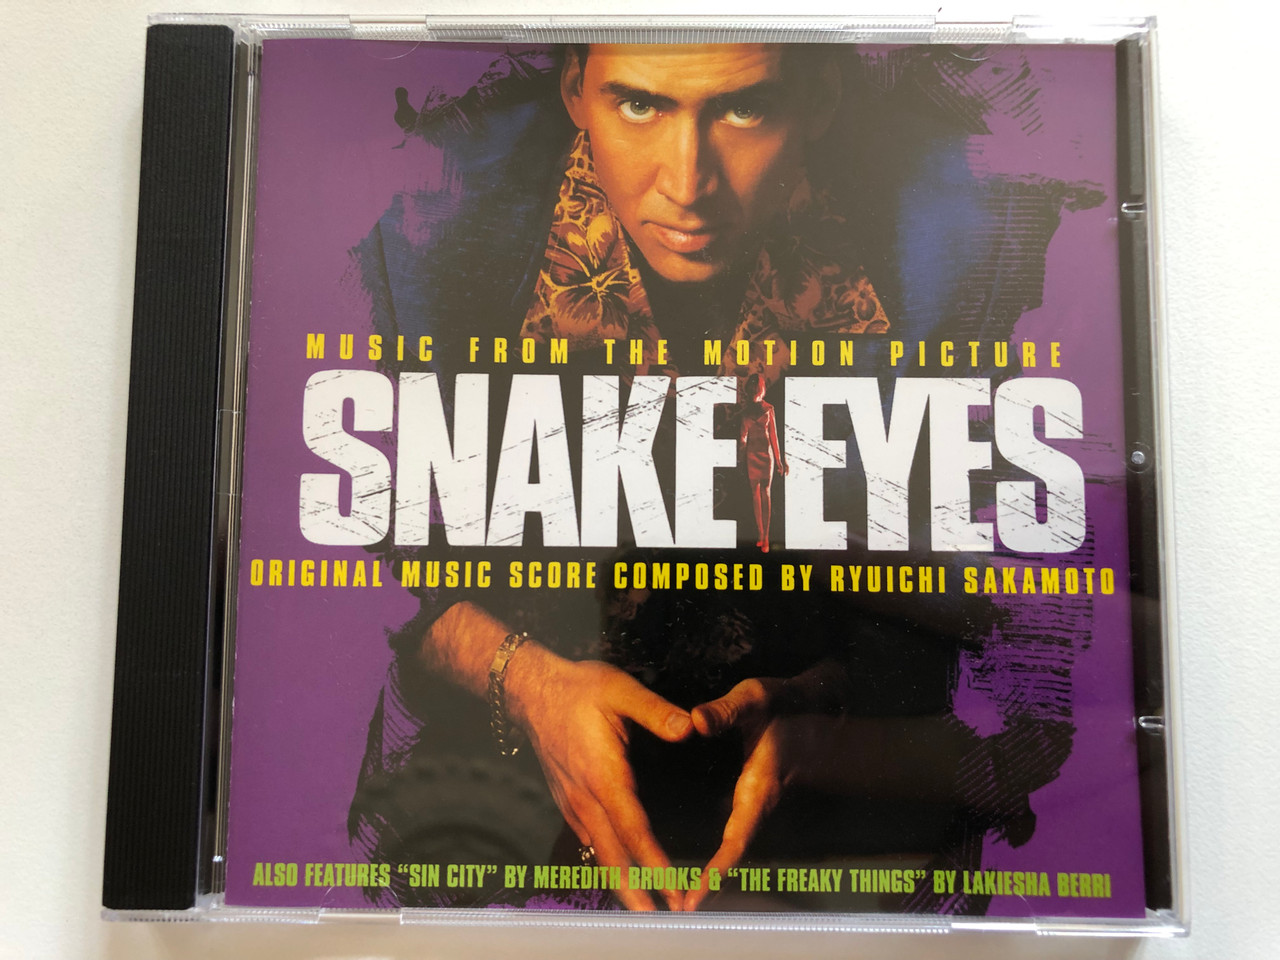 https://cdn10.bigcommerce.com/s-62bdpkt7pb/products/0/images/299320/Snake_Eyes_Music_From_The_Motion_Picture_-_Original_Music_Score_Composed_By_Ryuichi_Sakamoto_Also_Features_Sin_City_By_Meredith_Brooks_The_Freakly_Things_By_Lakiesha_Berri_Holly_1__00859.1694157544.1280.1280.JPG?c=2&_gl=1*bmdtuy*_ga*MjA2NTIxMjE2MC4xNTkwNTEyNTMy*_ga_WS2VZYPC6G*MTY5NDE0NDQwMy4xMDYzLjEuMTY5NDE1NzMyMi4zNS4wLjA.